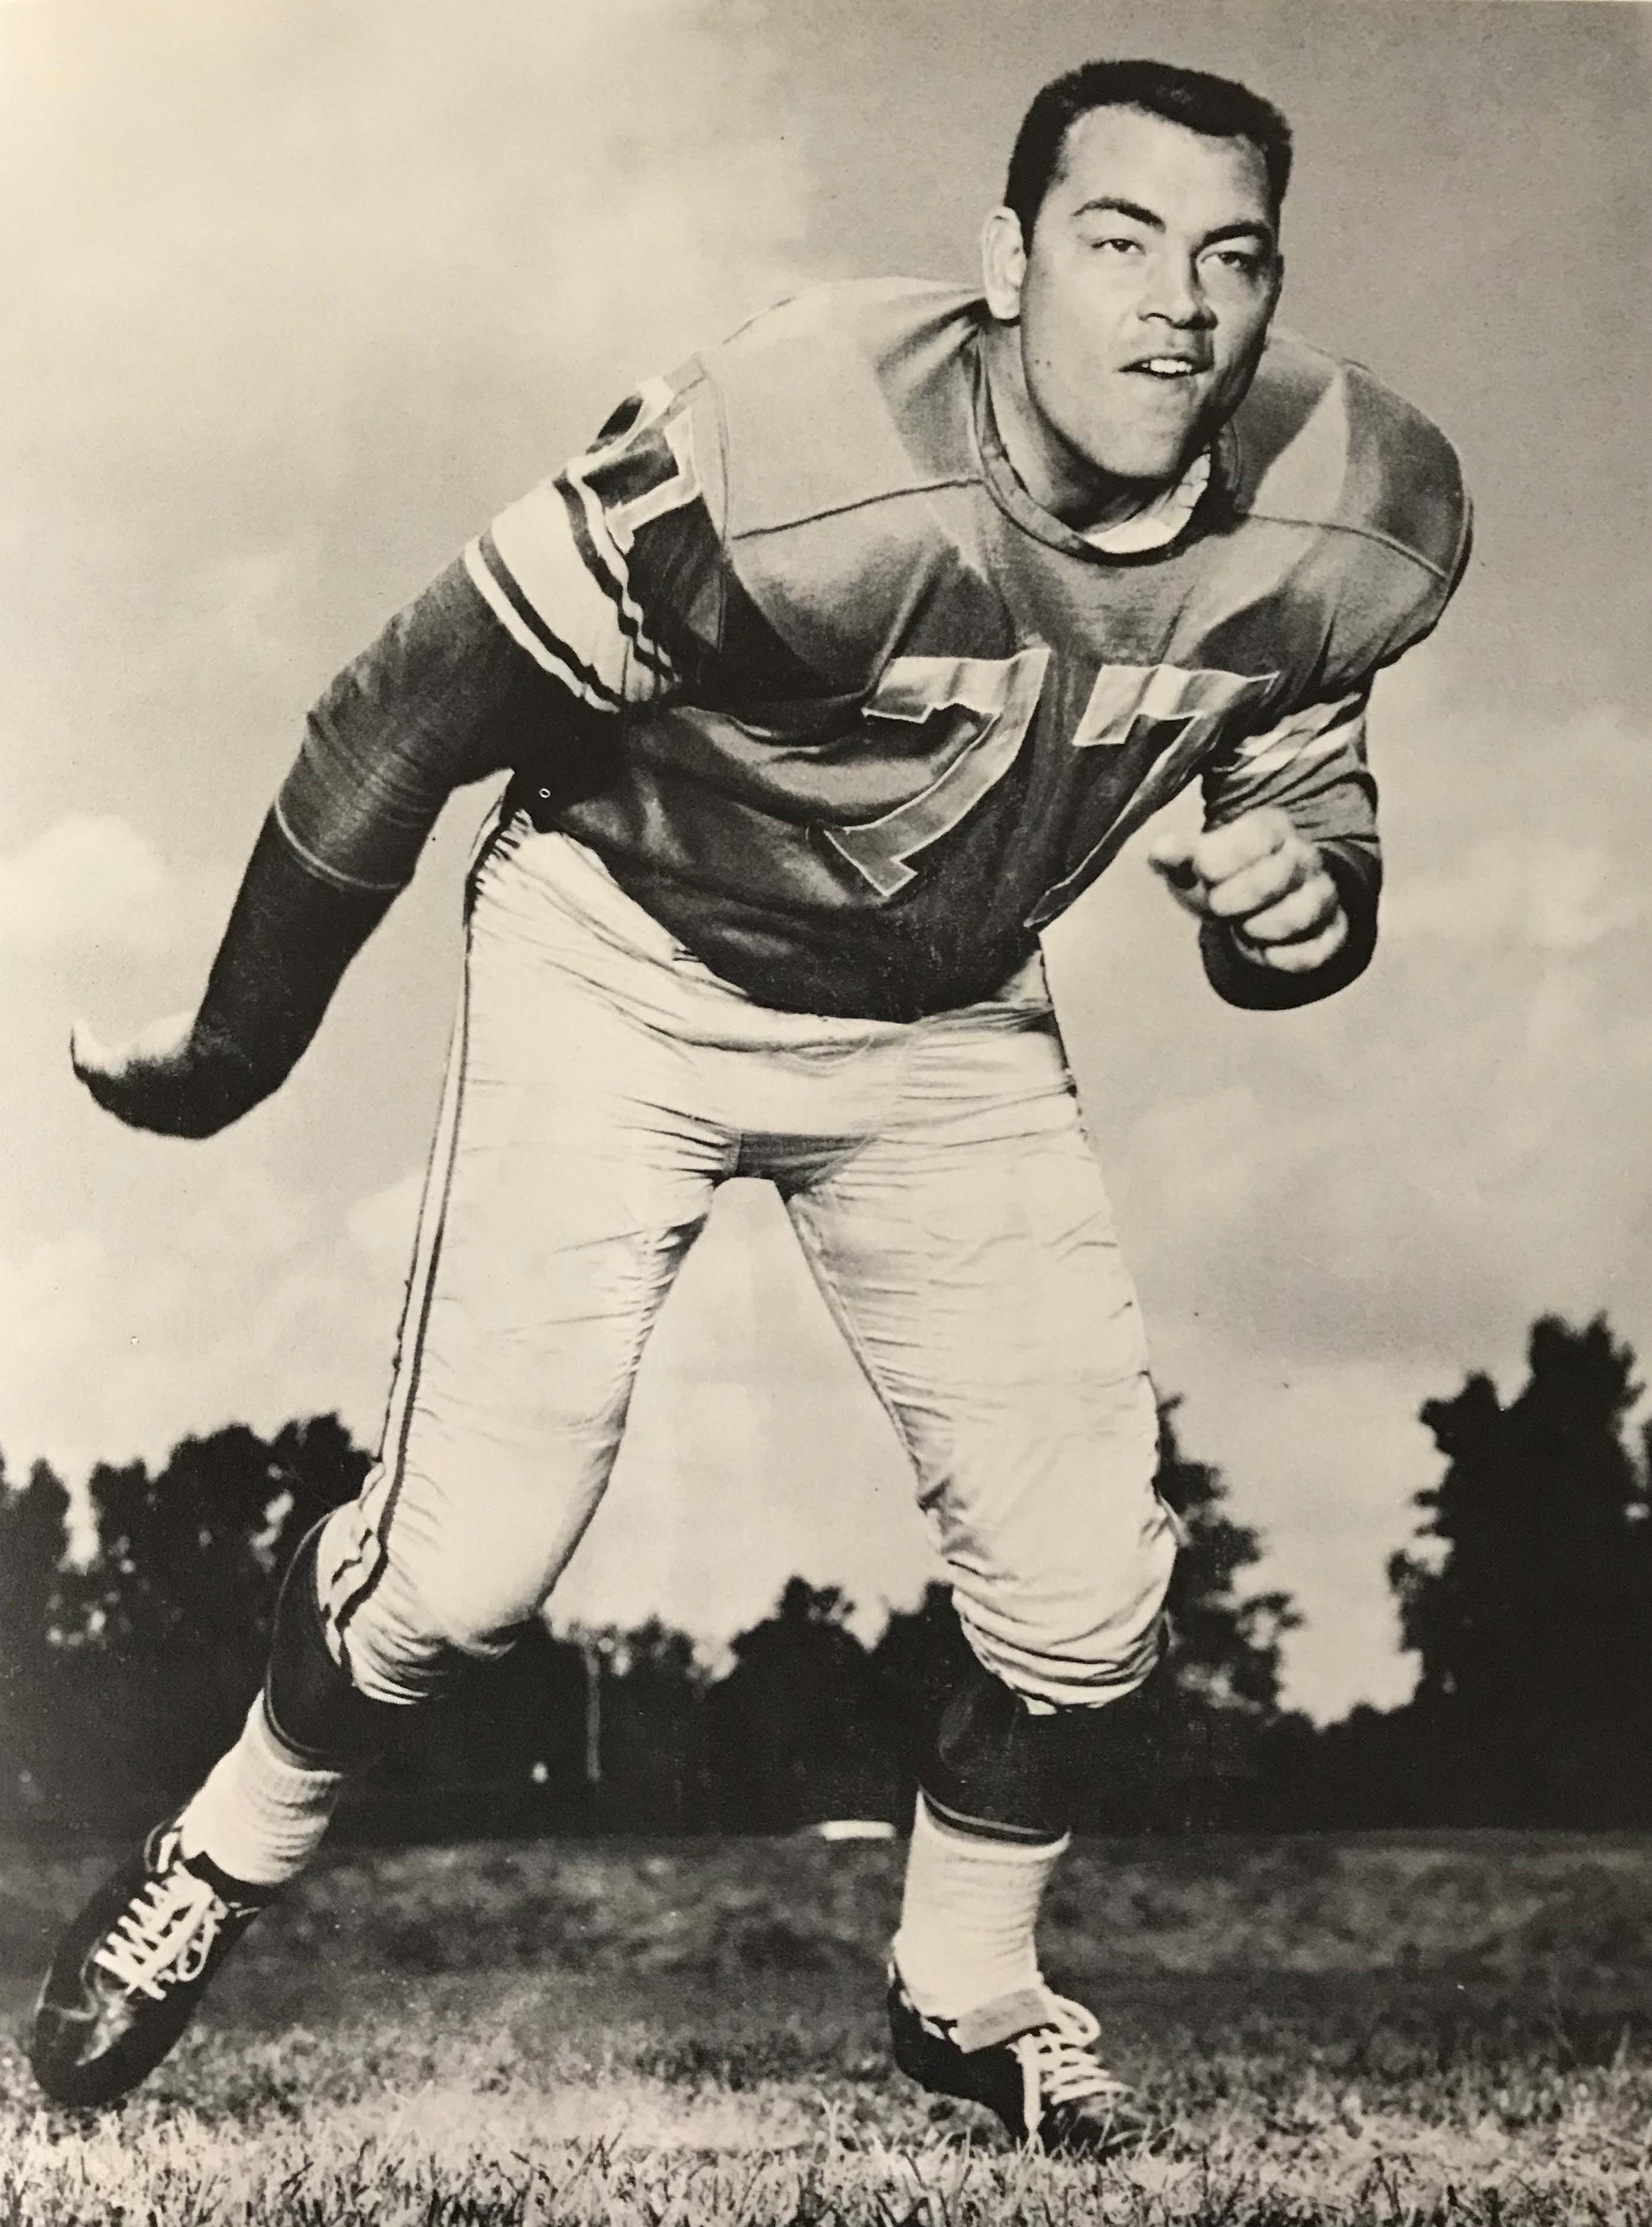 Marvin Daniel “Danny” LaRose, a former offensive lineman for the Detroit Lions in the early 1960s, died Saturday in Luther, Mich., at the age of 80.